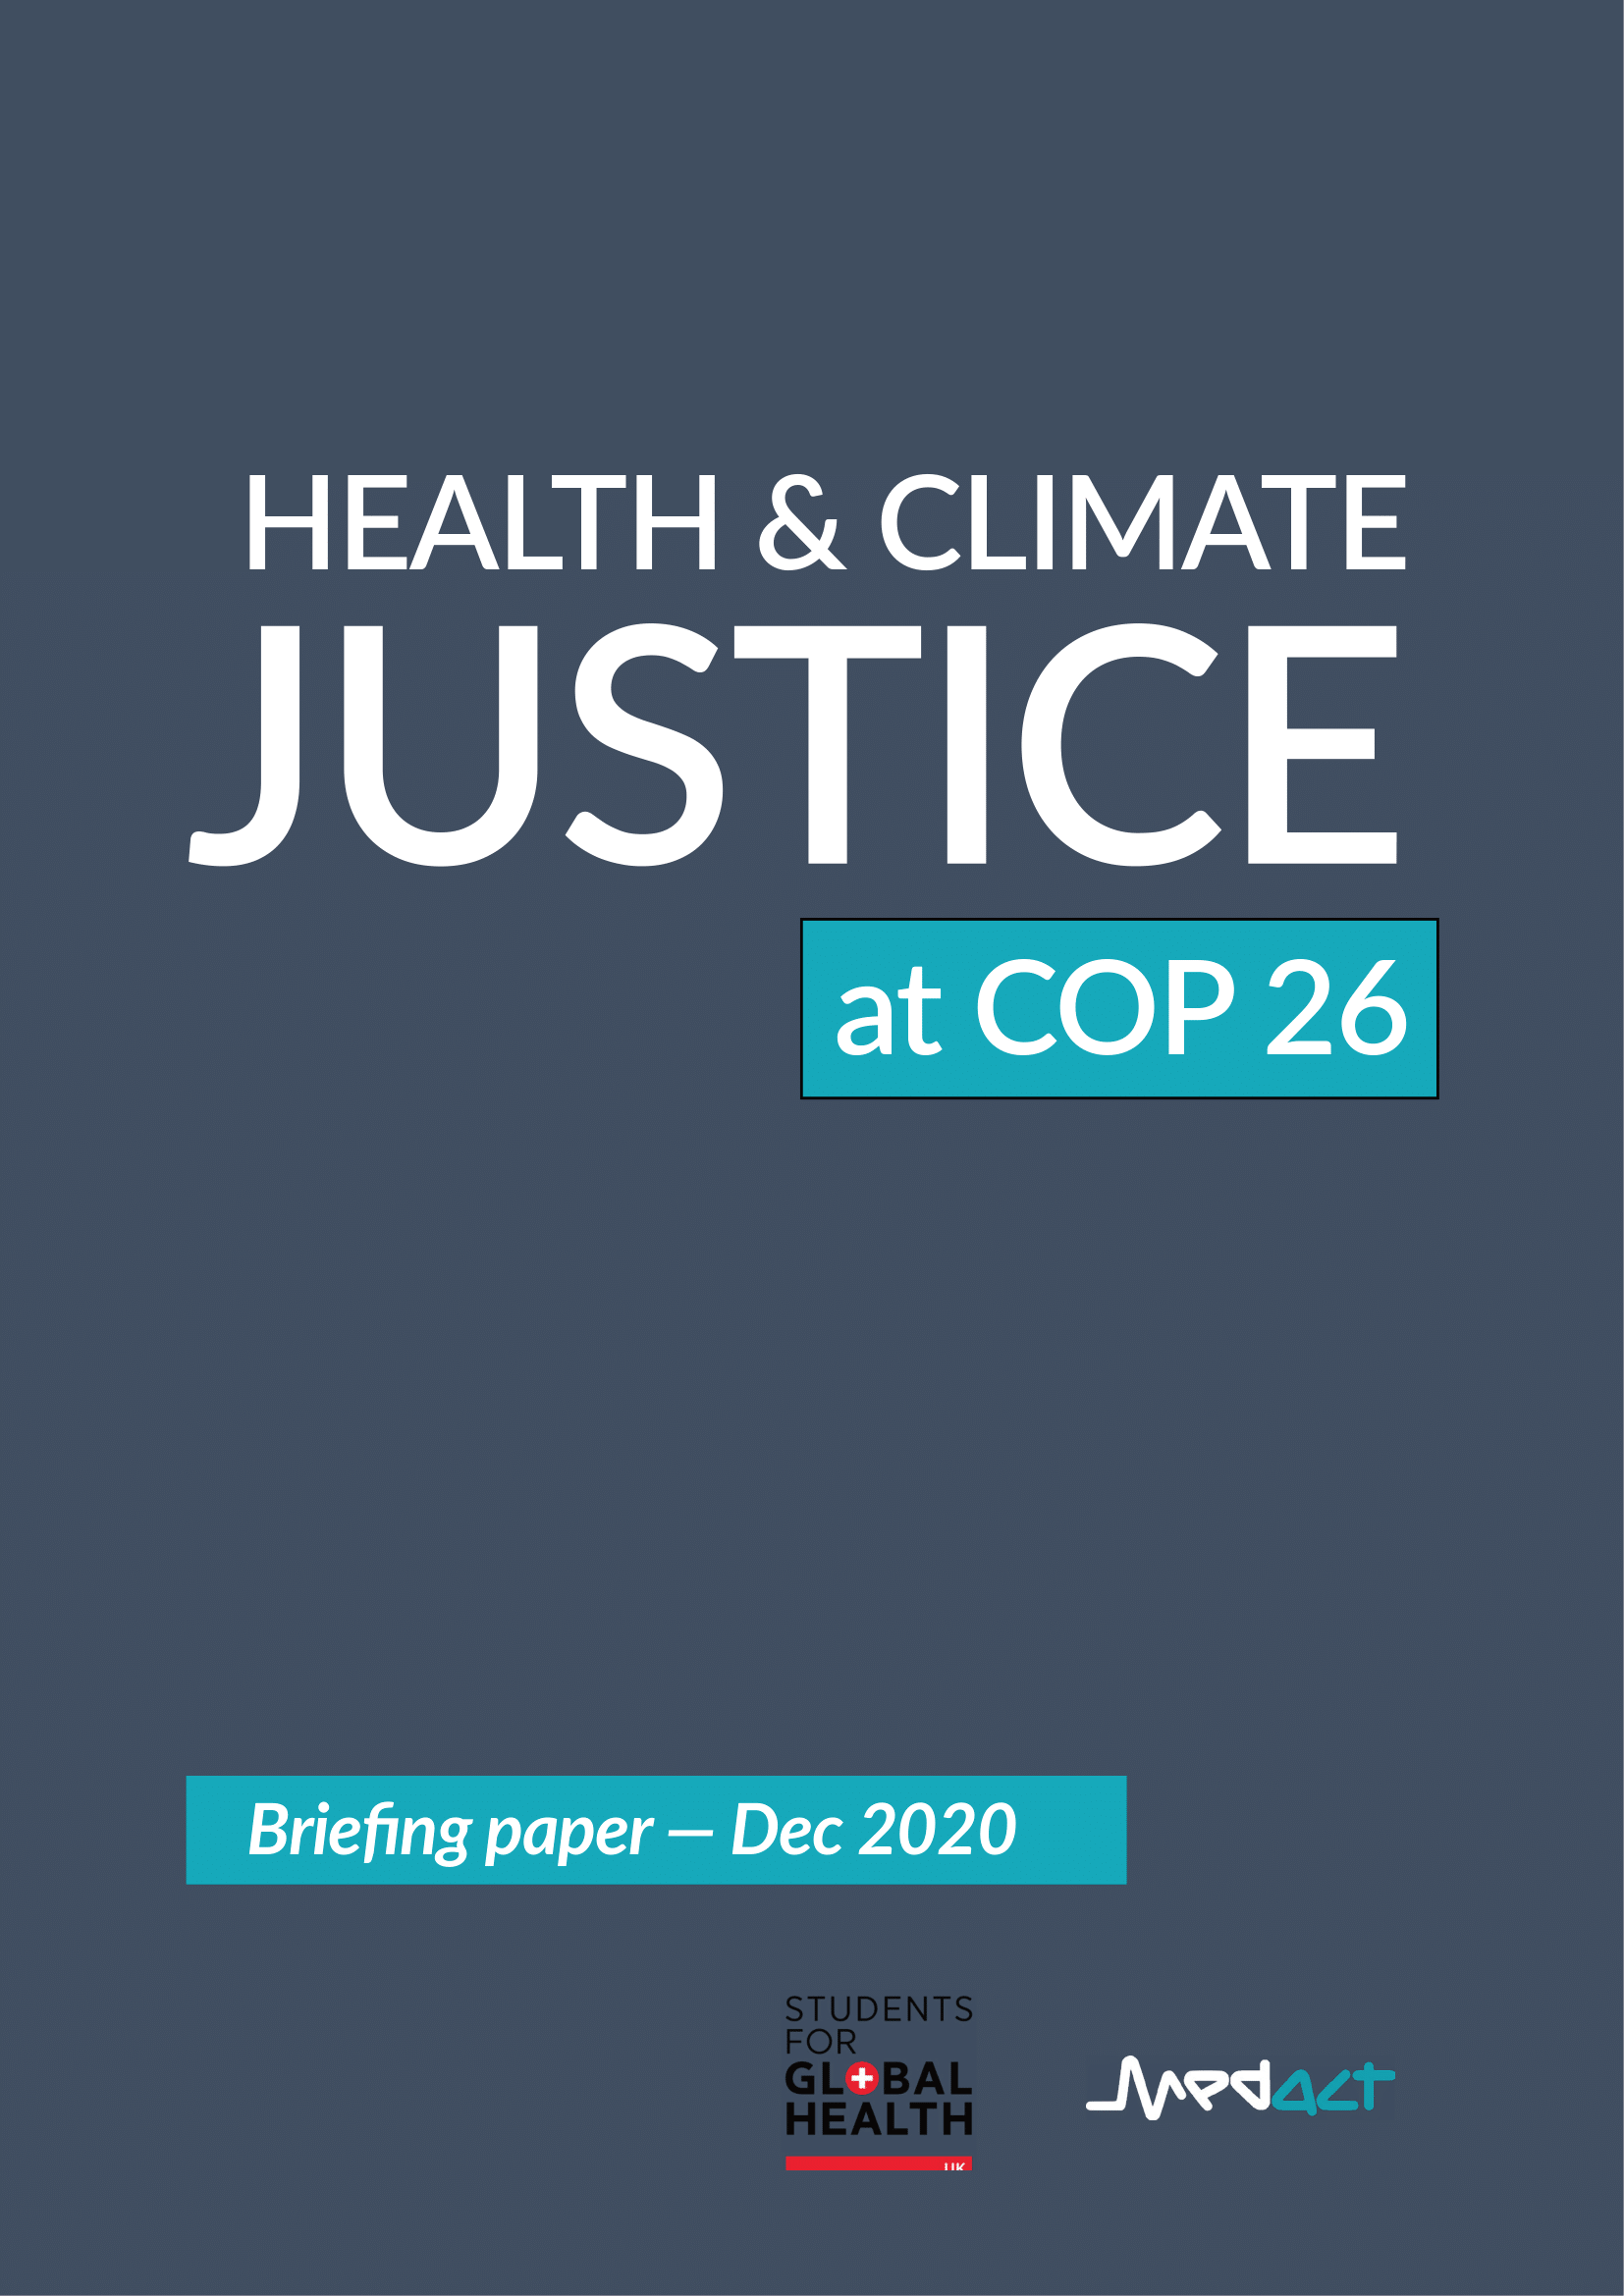 Health & Climate Justice at COP 26